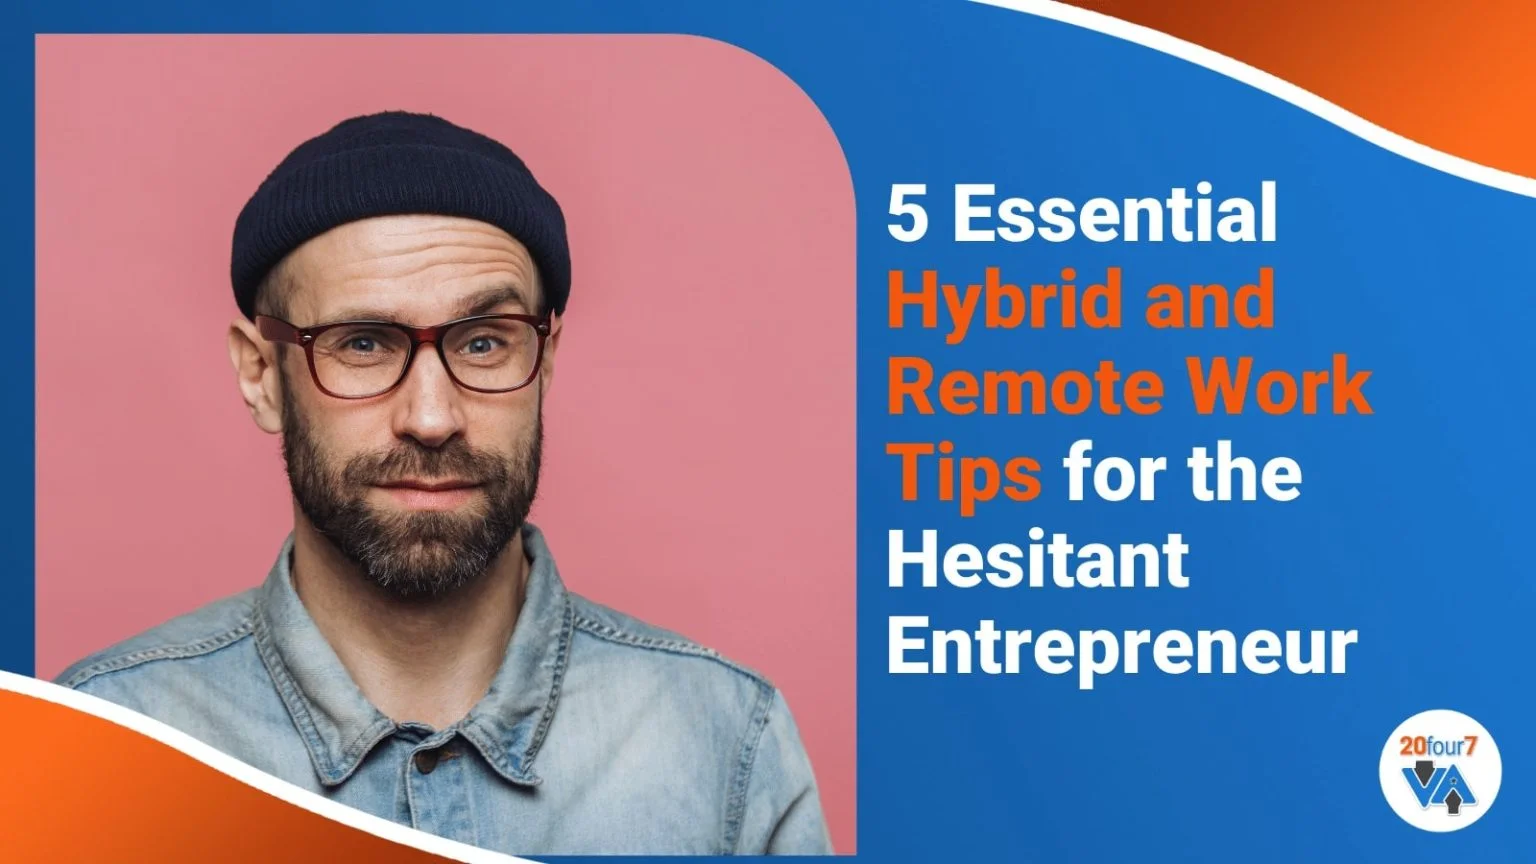 5 Essential Hybrid and Remote Work Tips for the Hesitant Entrepreneur